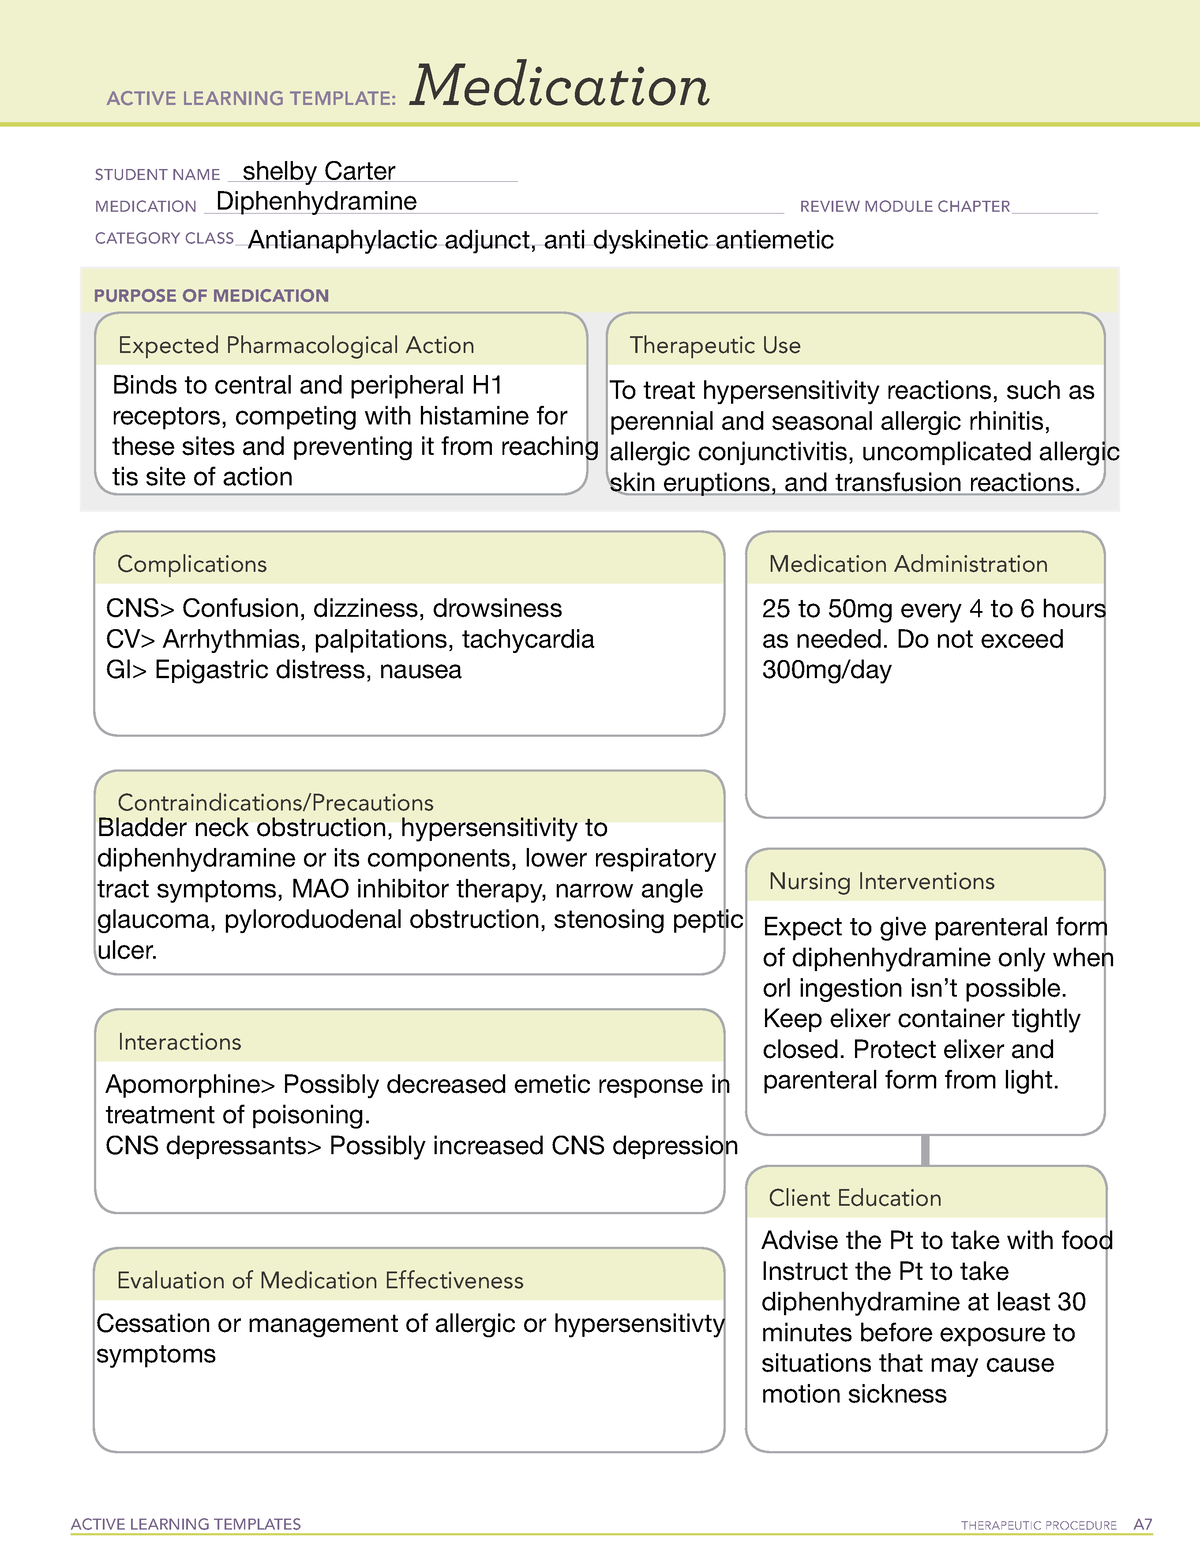 Diphenhydramine med templates ACTIVE LEARNING TEMPLATES THERAPEUTIC